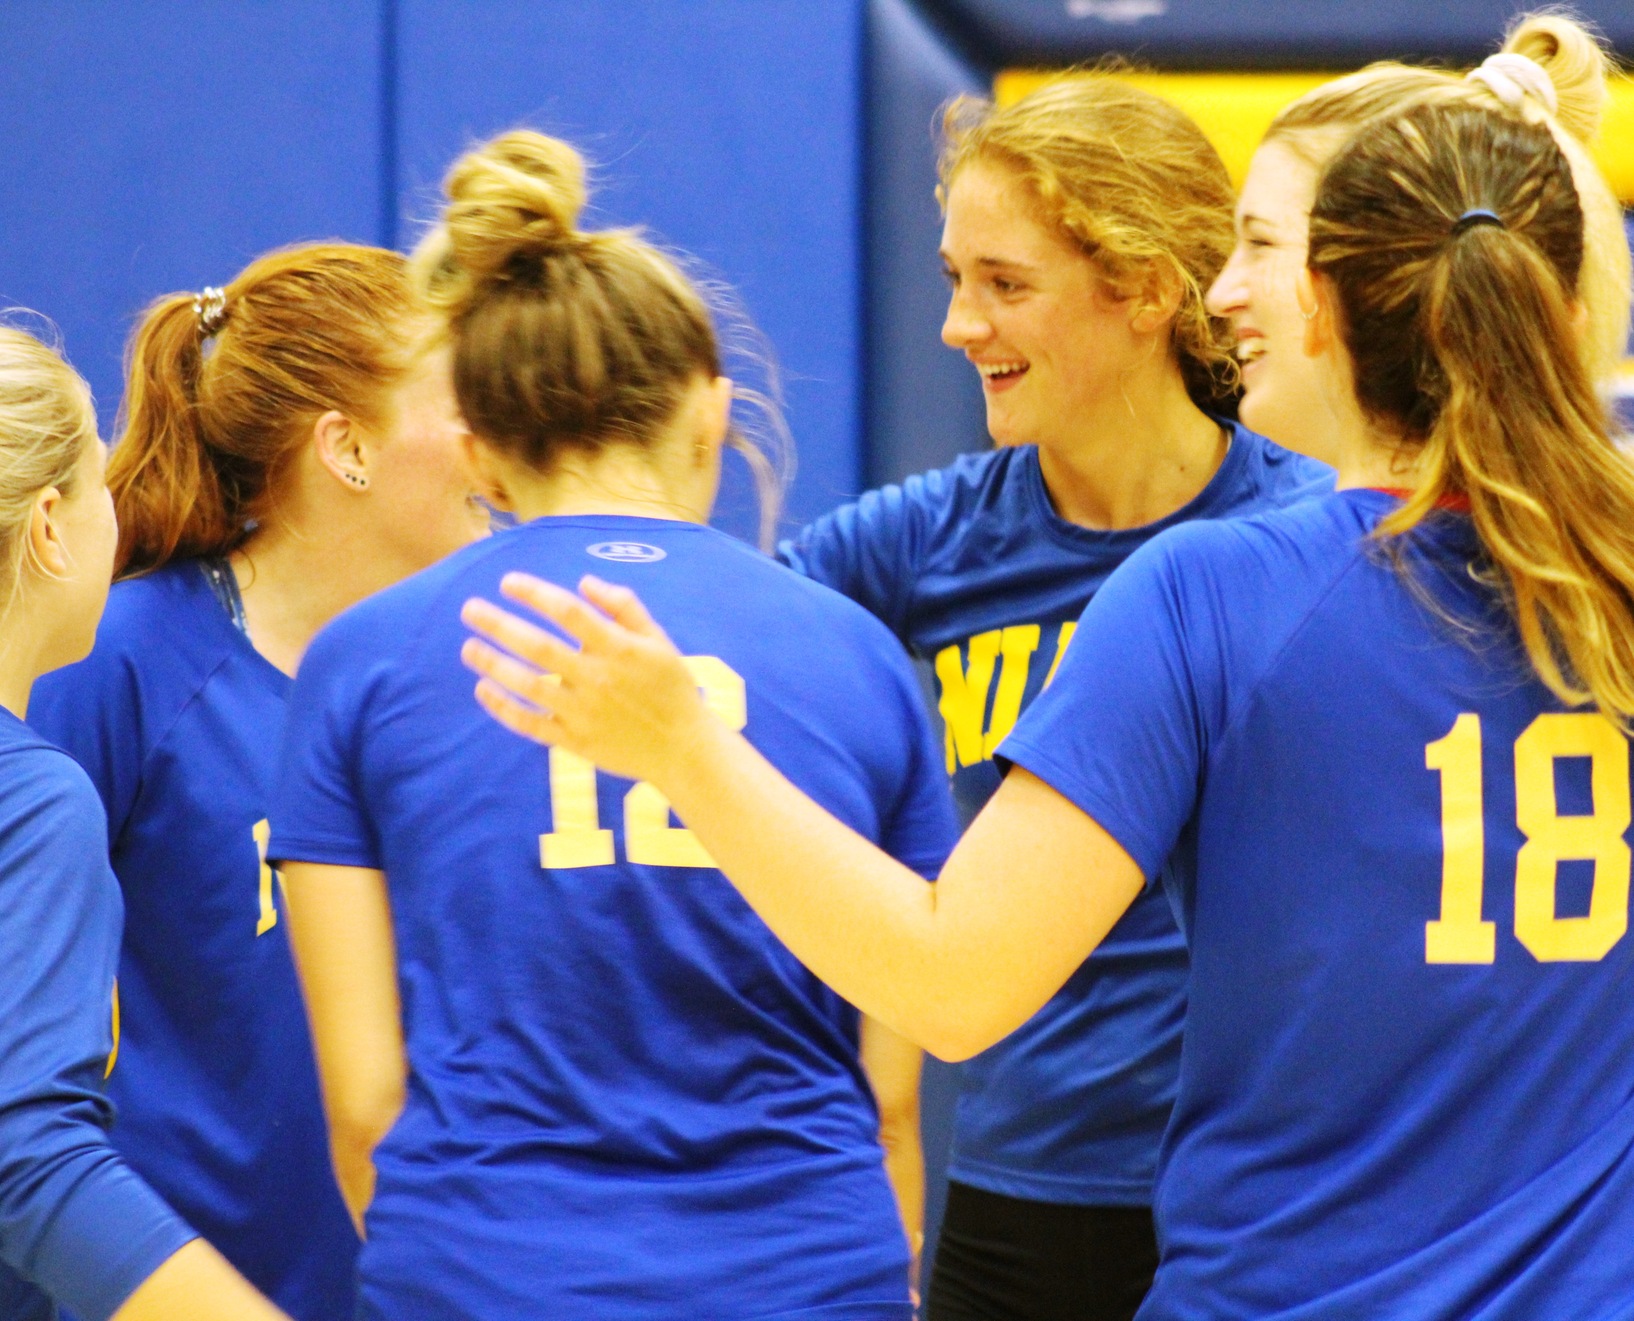 NIACC players celebrate a point in last Friday's scrimmage against Iowa Central.